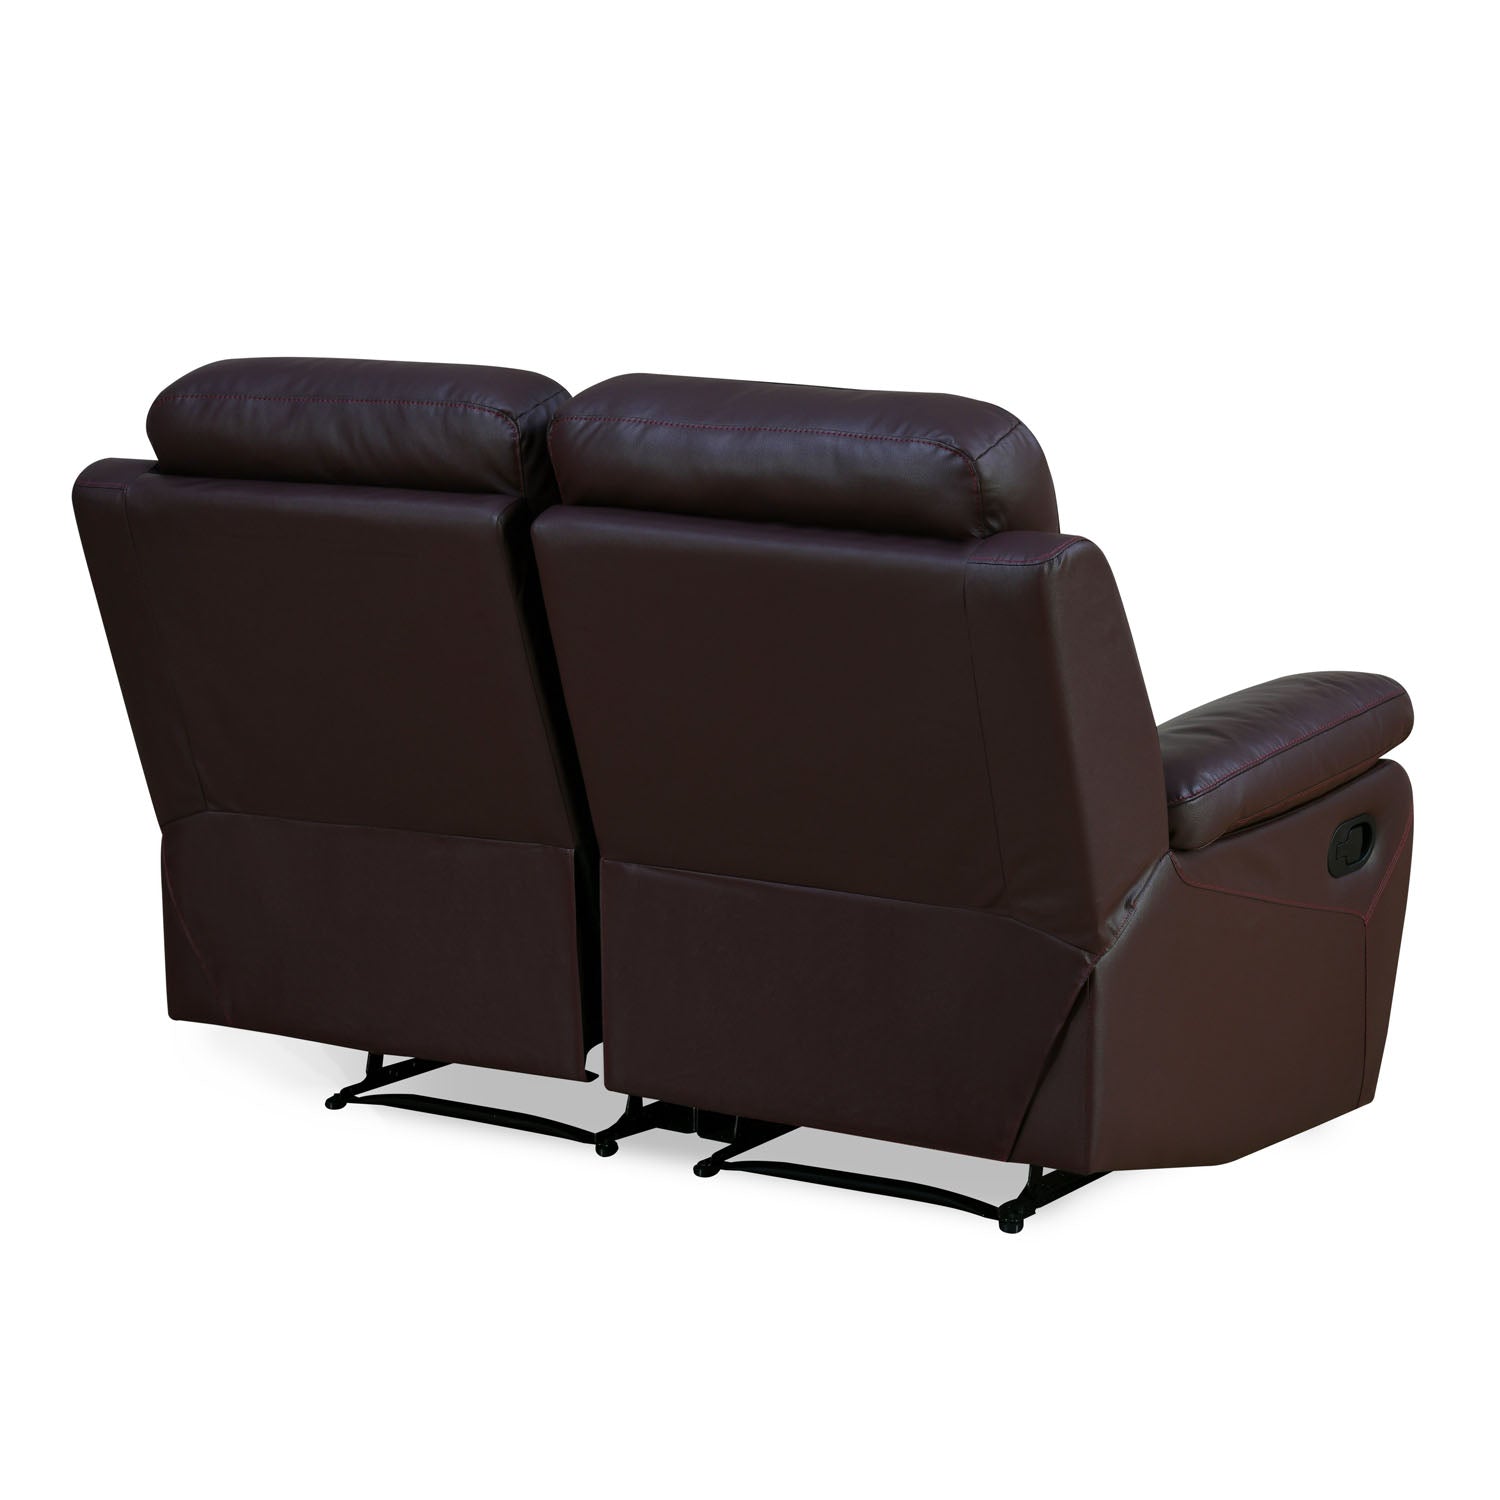 Mandy 2 Seater Leather Manual Recliner (Burgundy)